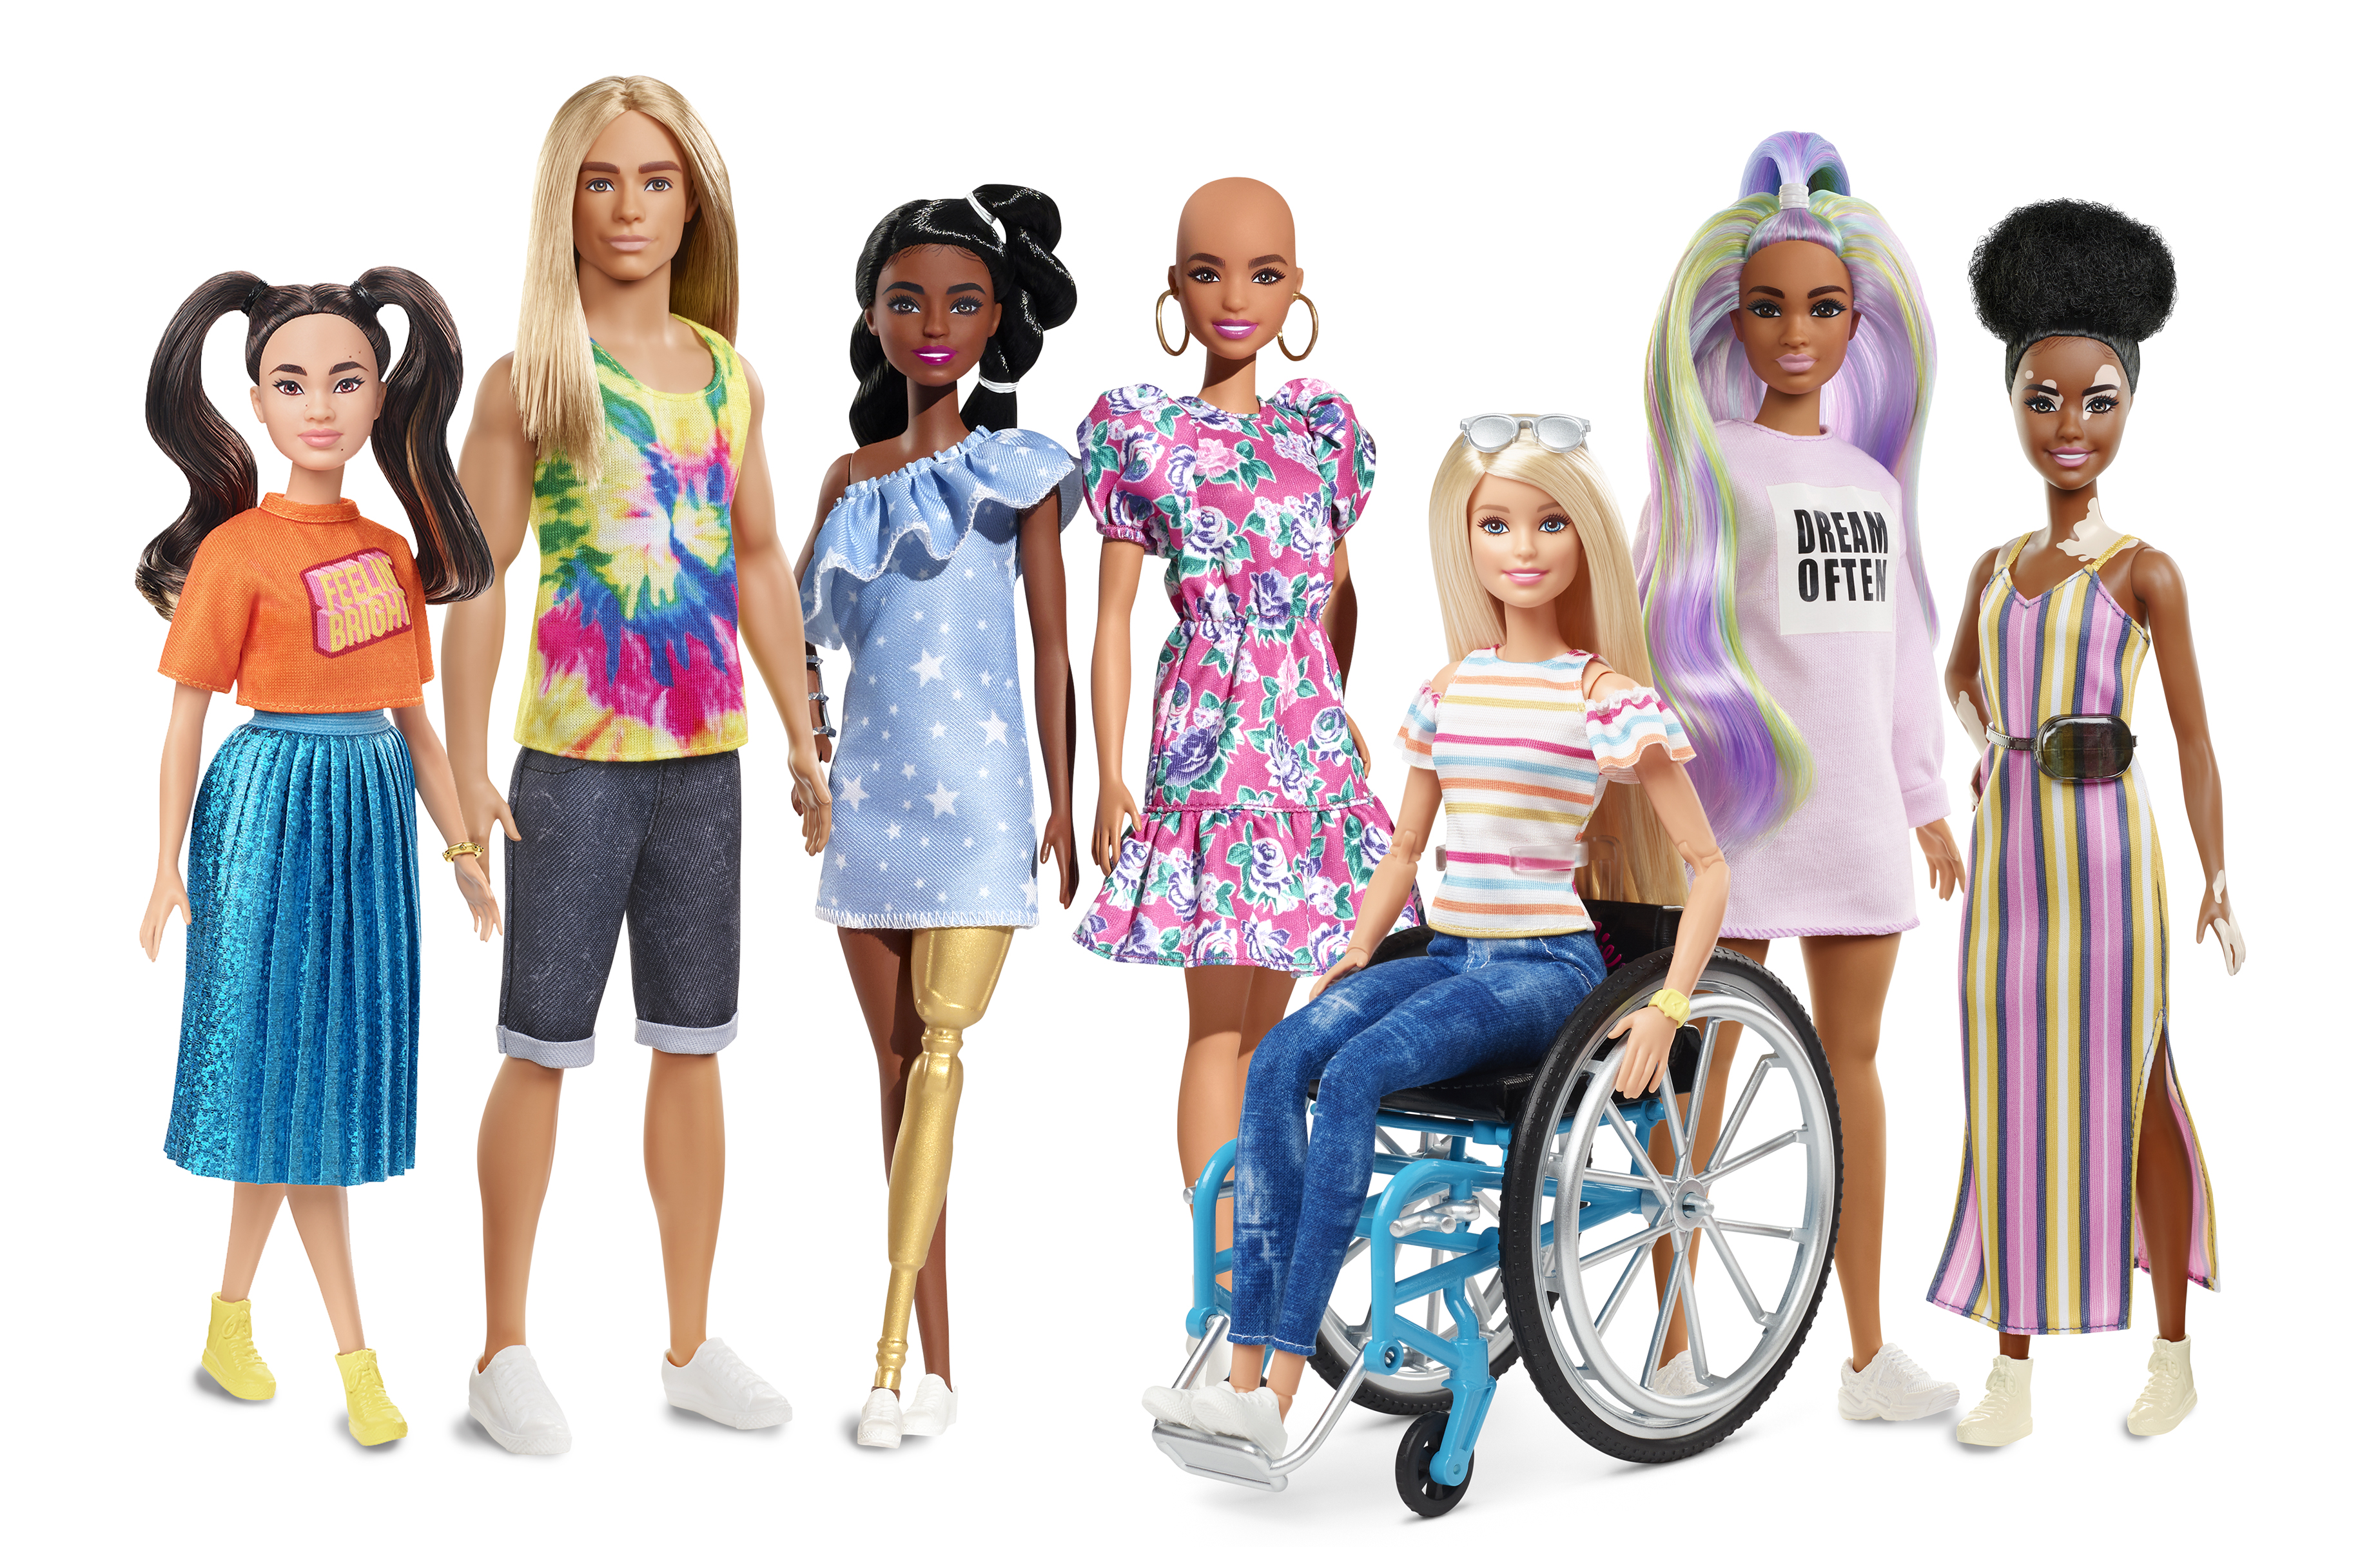 The New Barbie Fashionistas Line for 2020 Is One of the Most Diverse